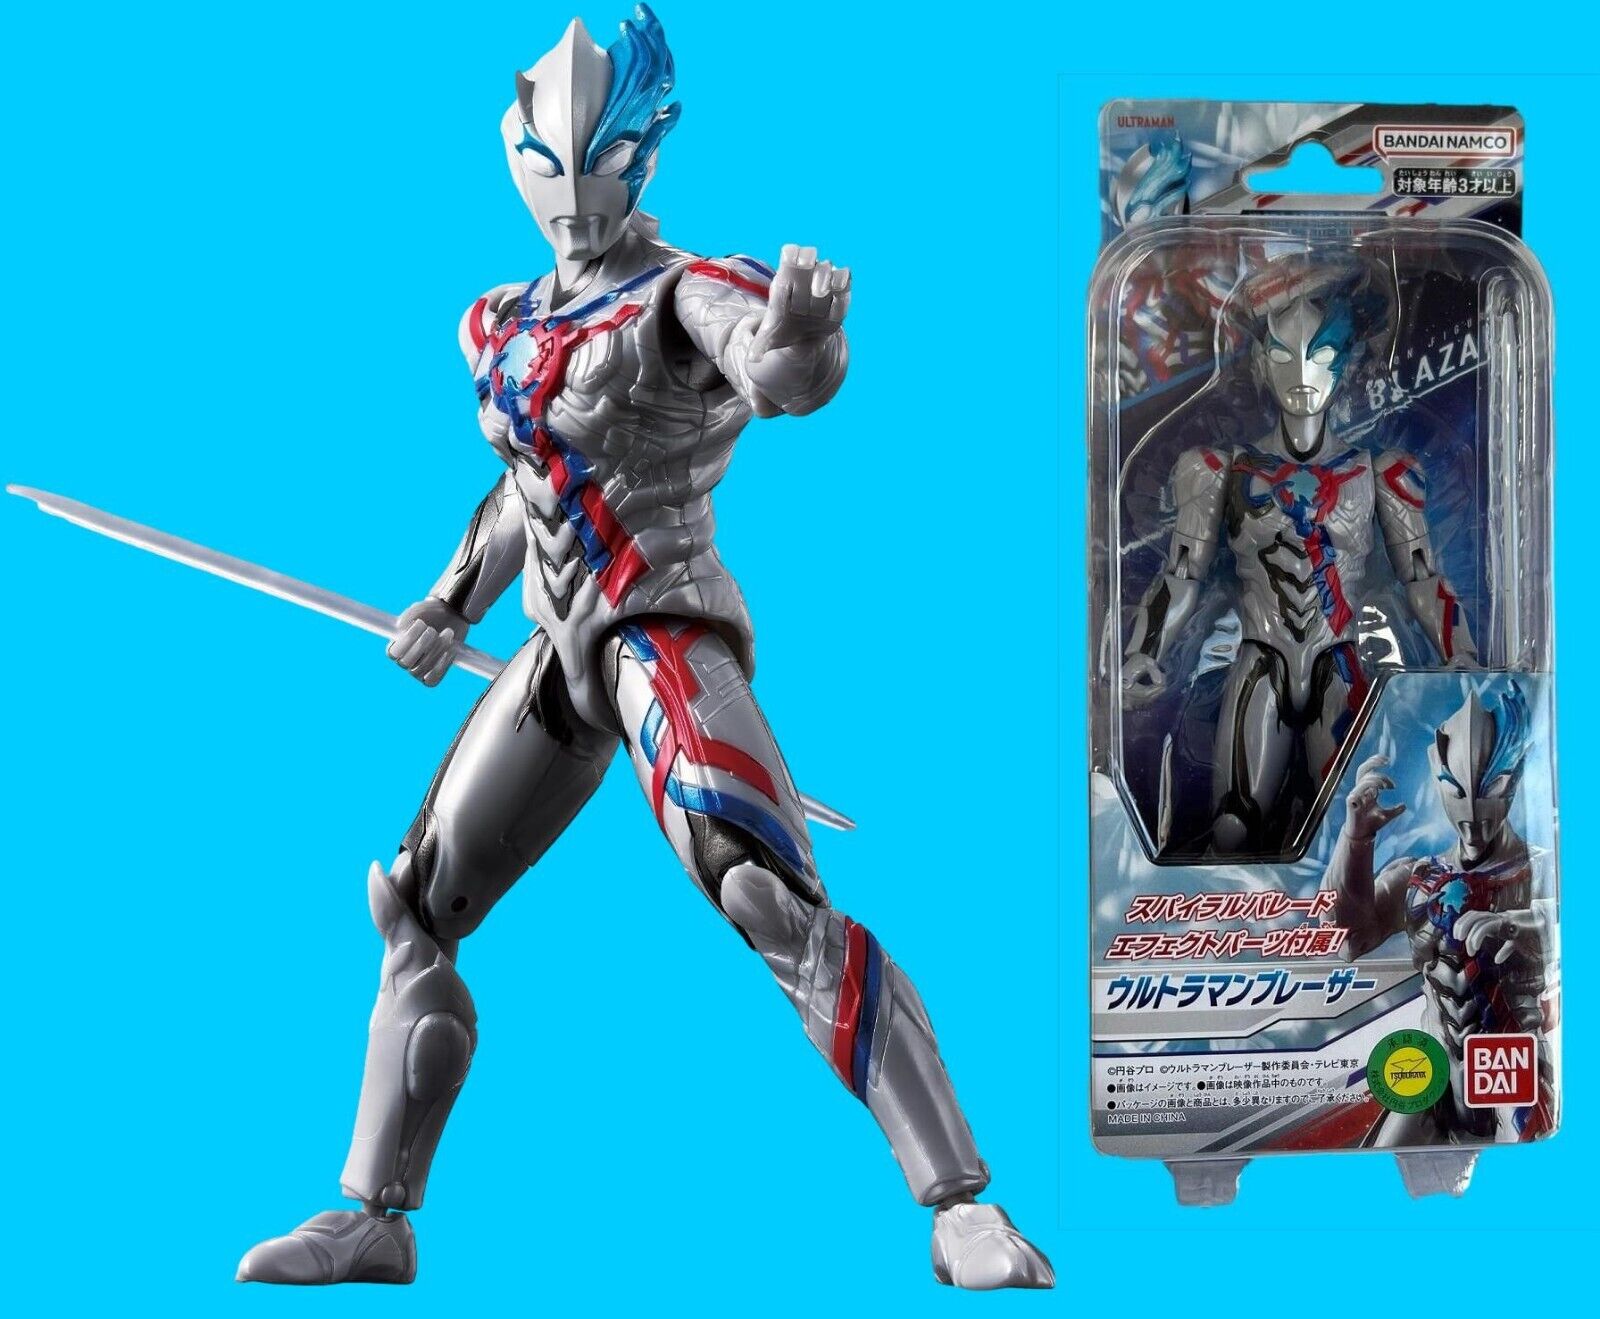 Bandai Ultraman Blazar Ultra Action Figure 150mm 5.90inch 18 points movable